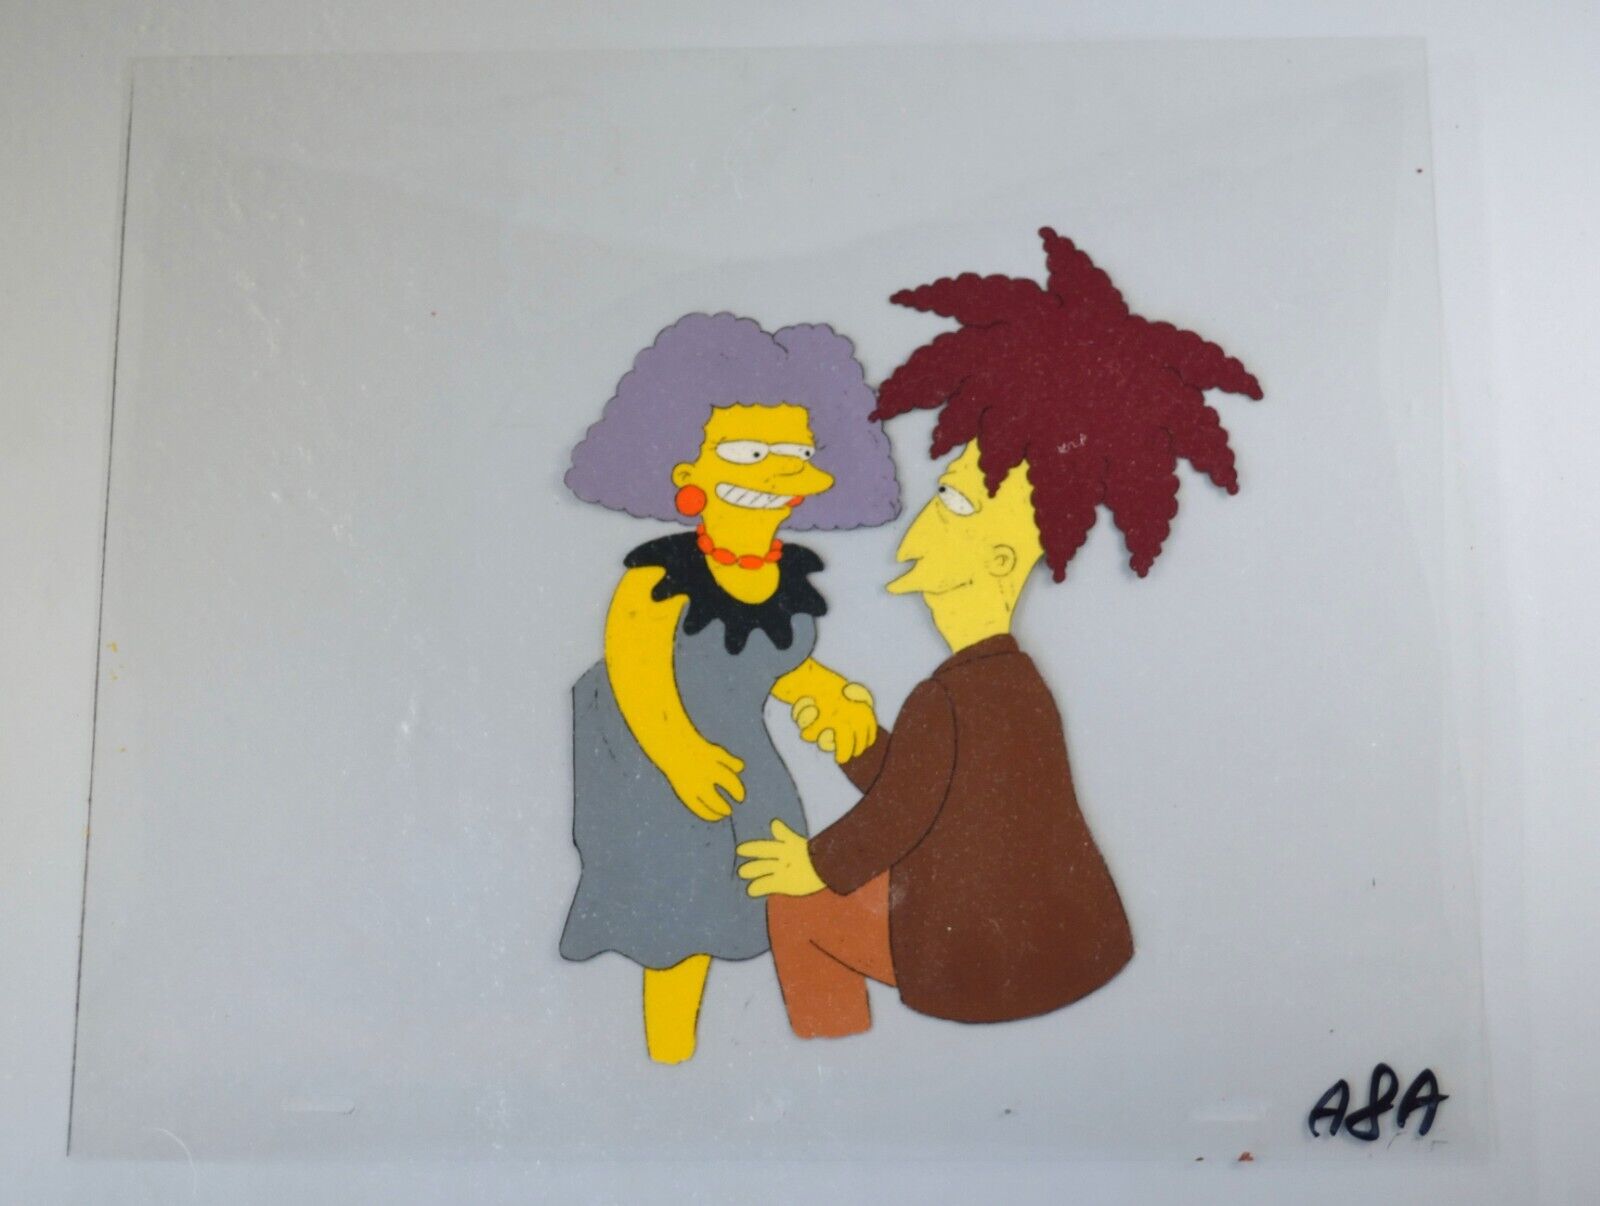 Simpsons Production Cels, Sideshow Bob Proposing to Selma with Pencil Sketch